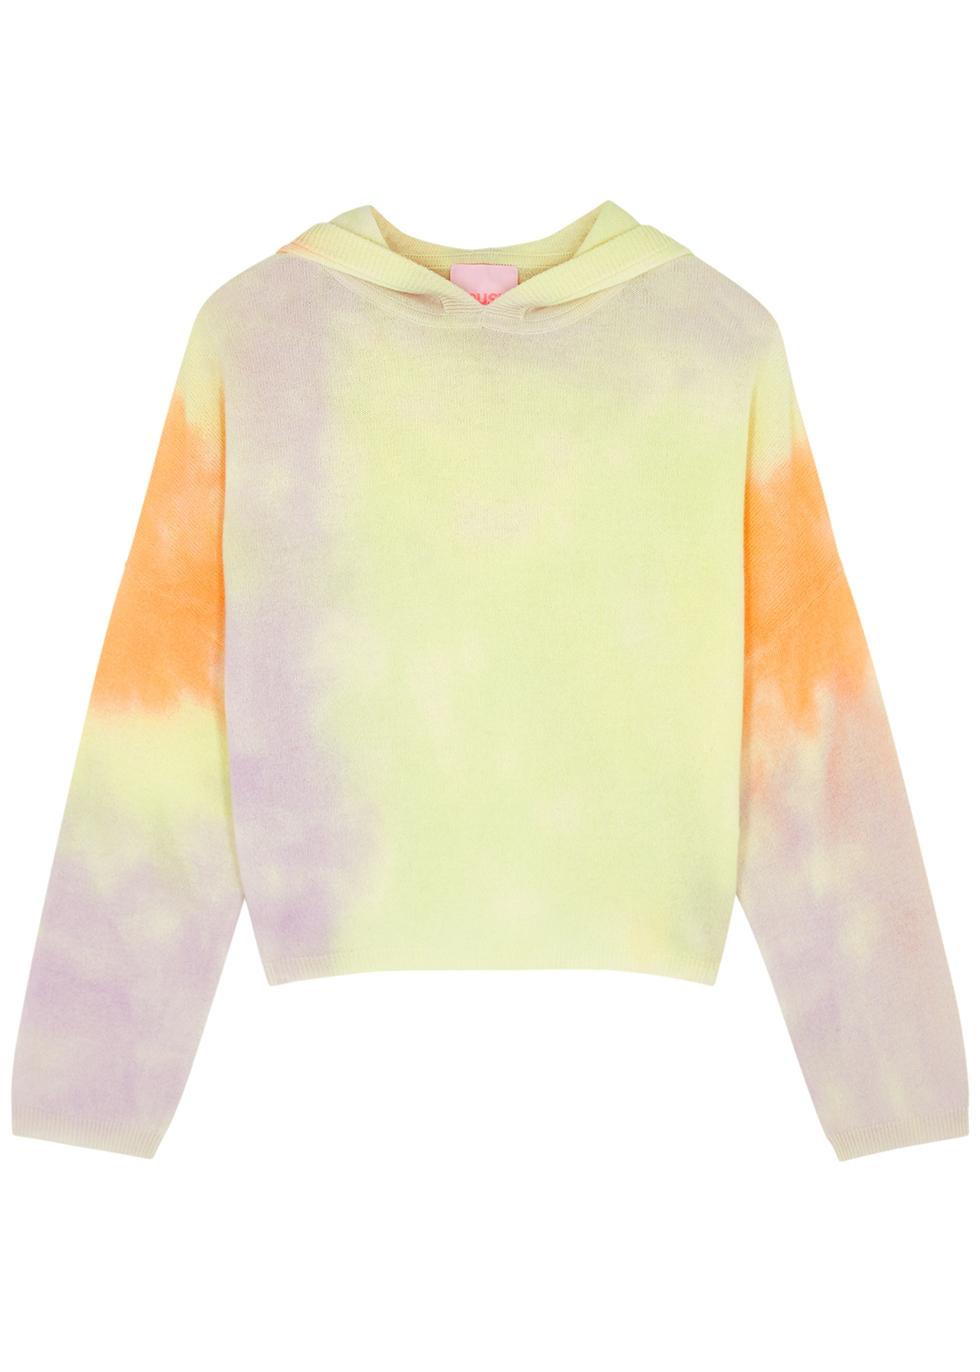 Tallin tie-dyed hoodied cashmere sweatshirt by CRUSH CASHMERE